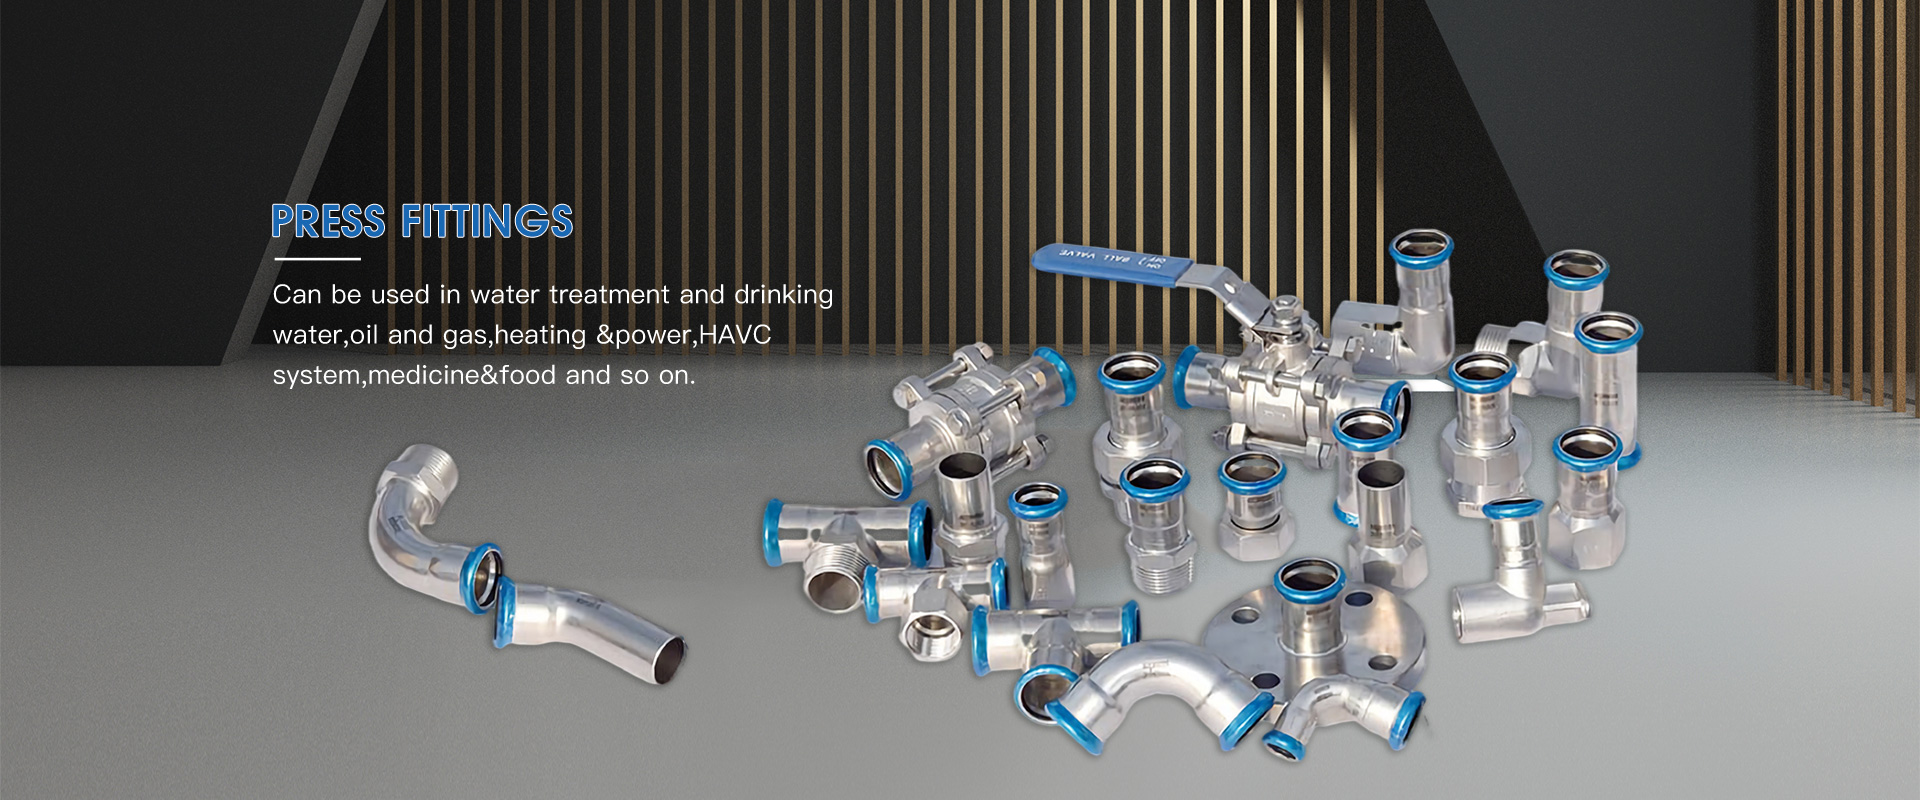 Press Fittings Manufacturers